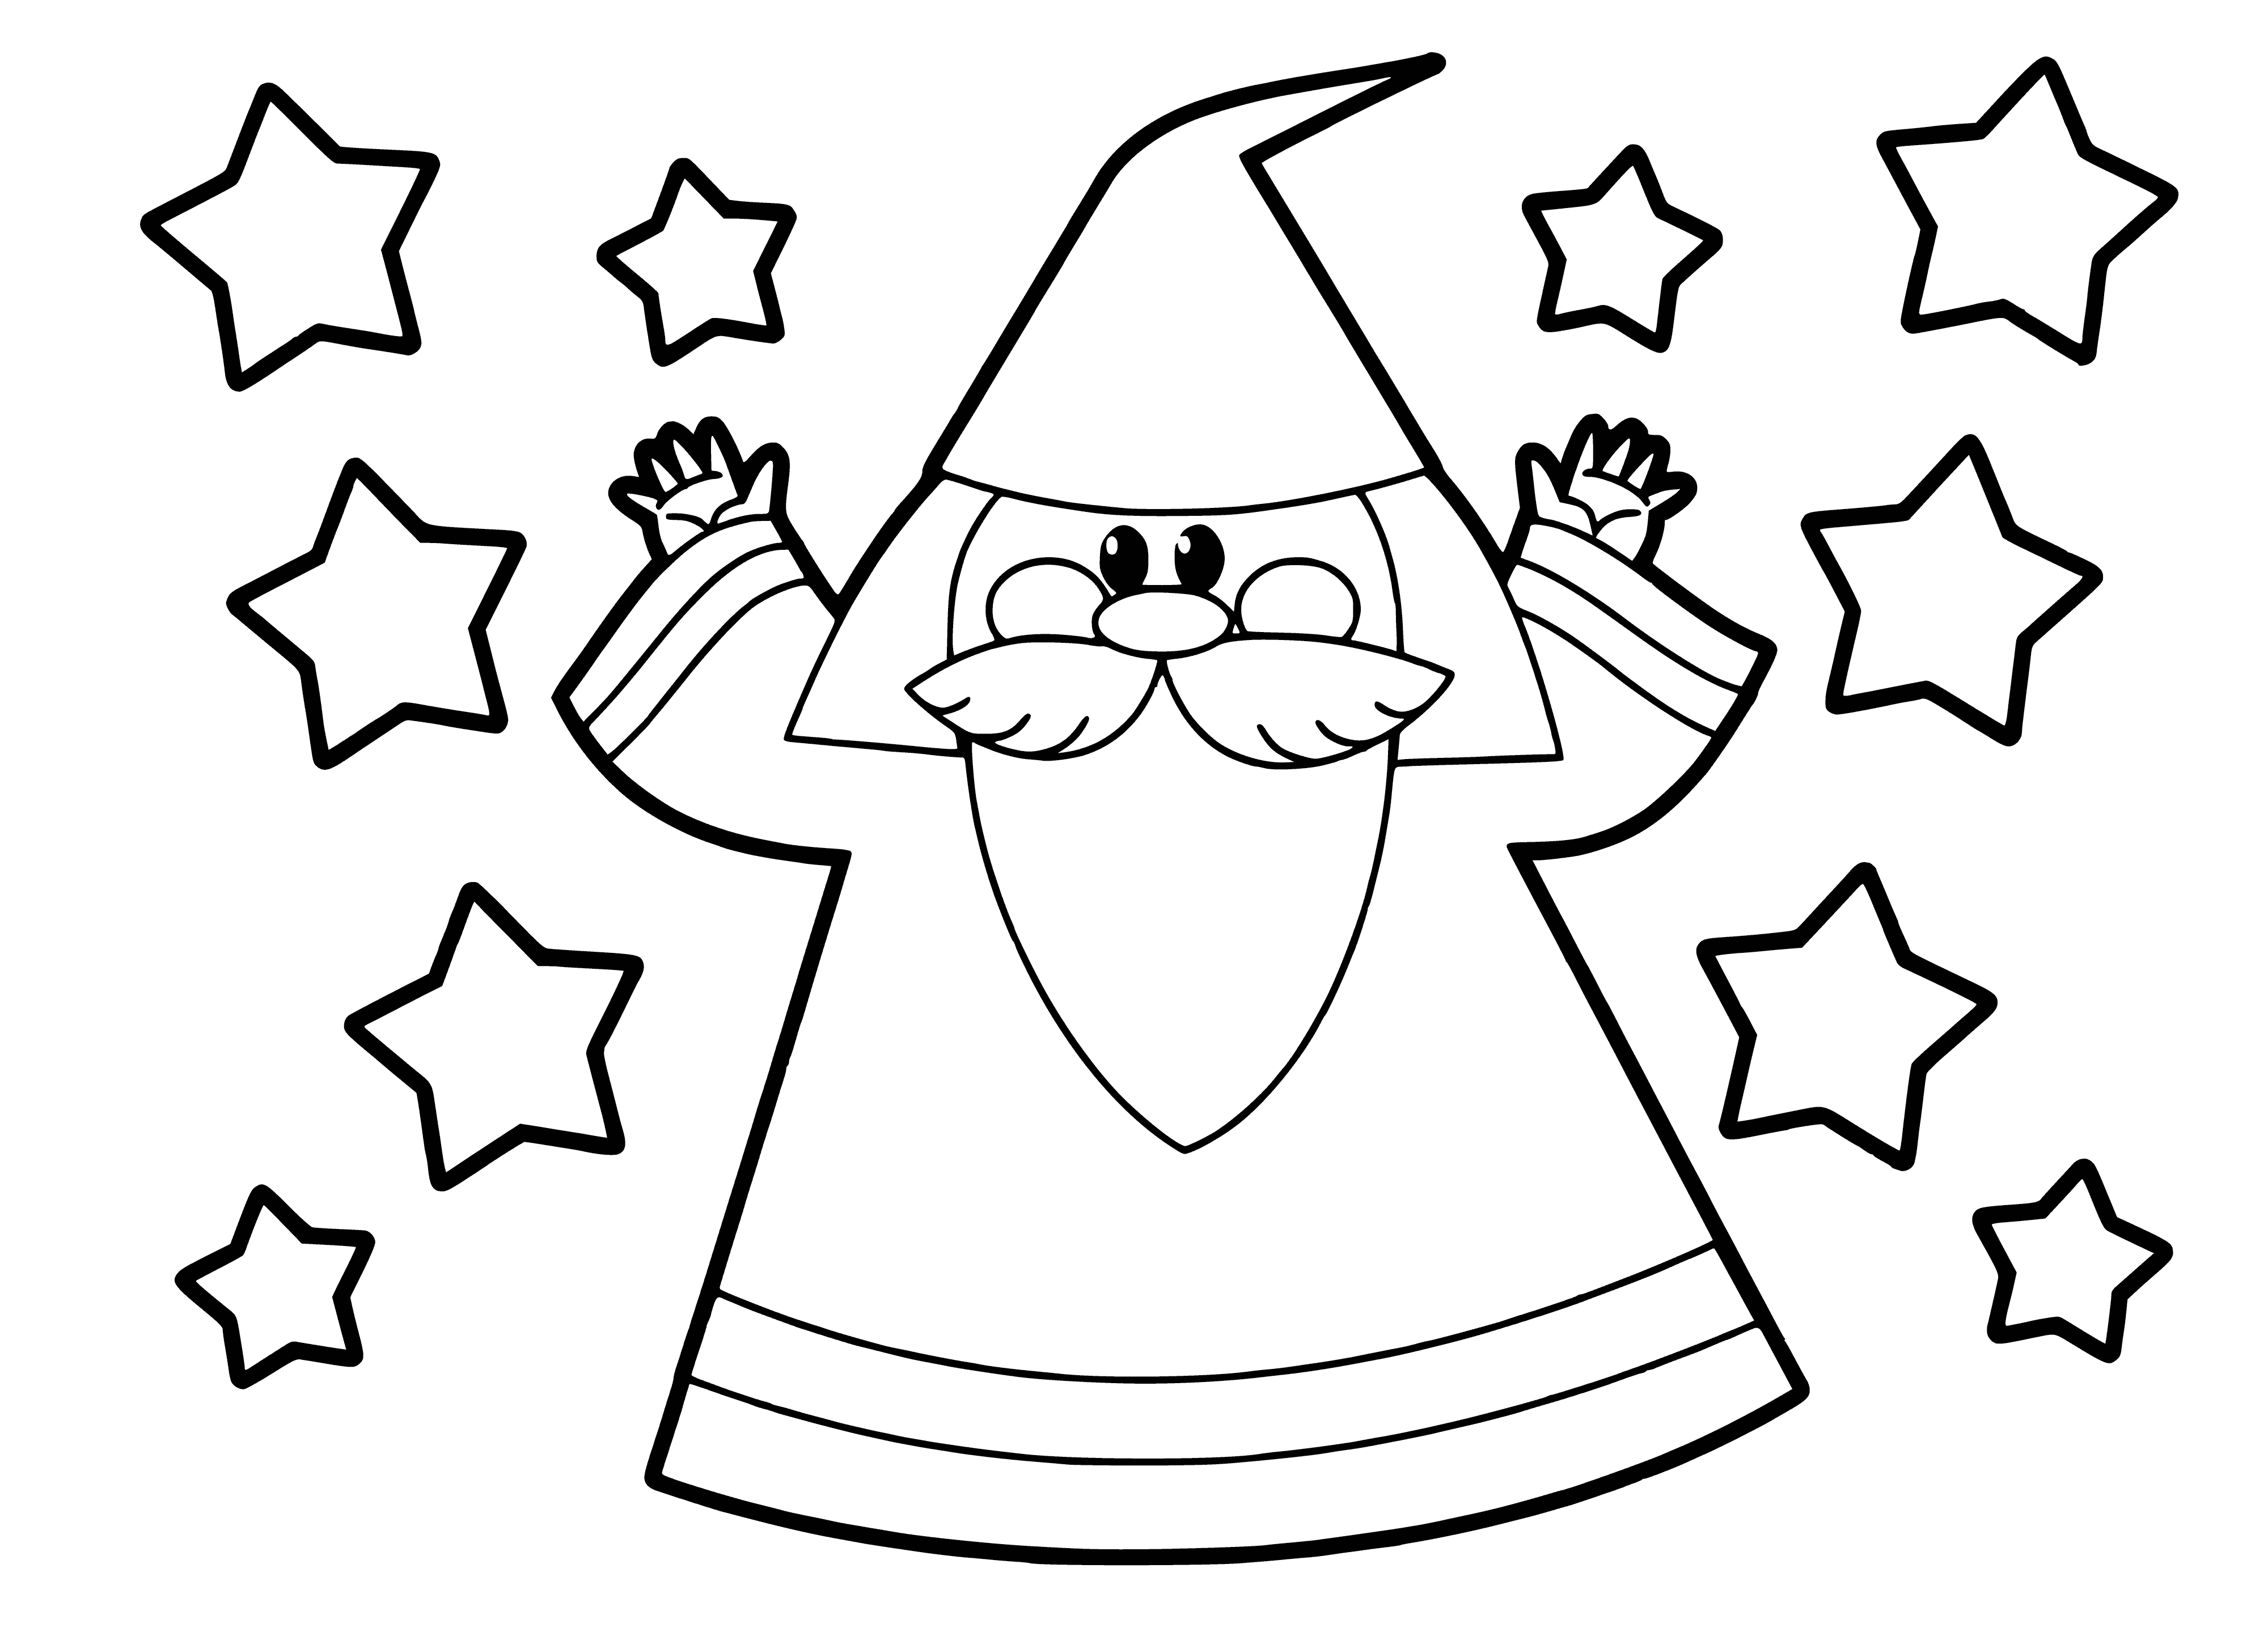 coloring page: Kids playing in a garden: one dressed as wizard waving wand, others laughing, having fun. #childhoodfun